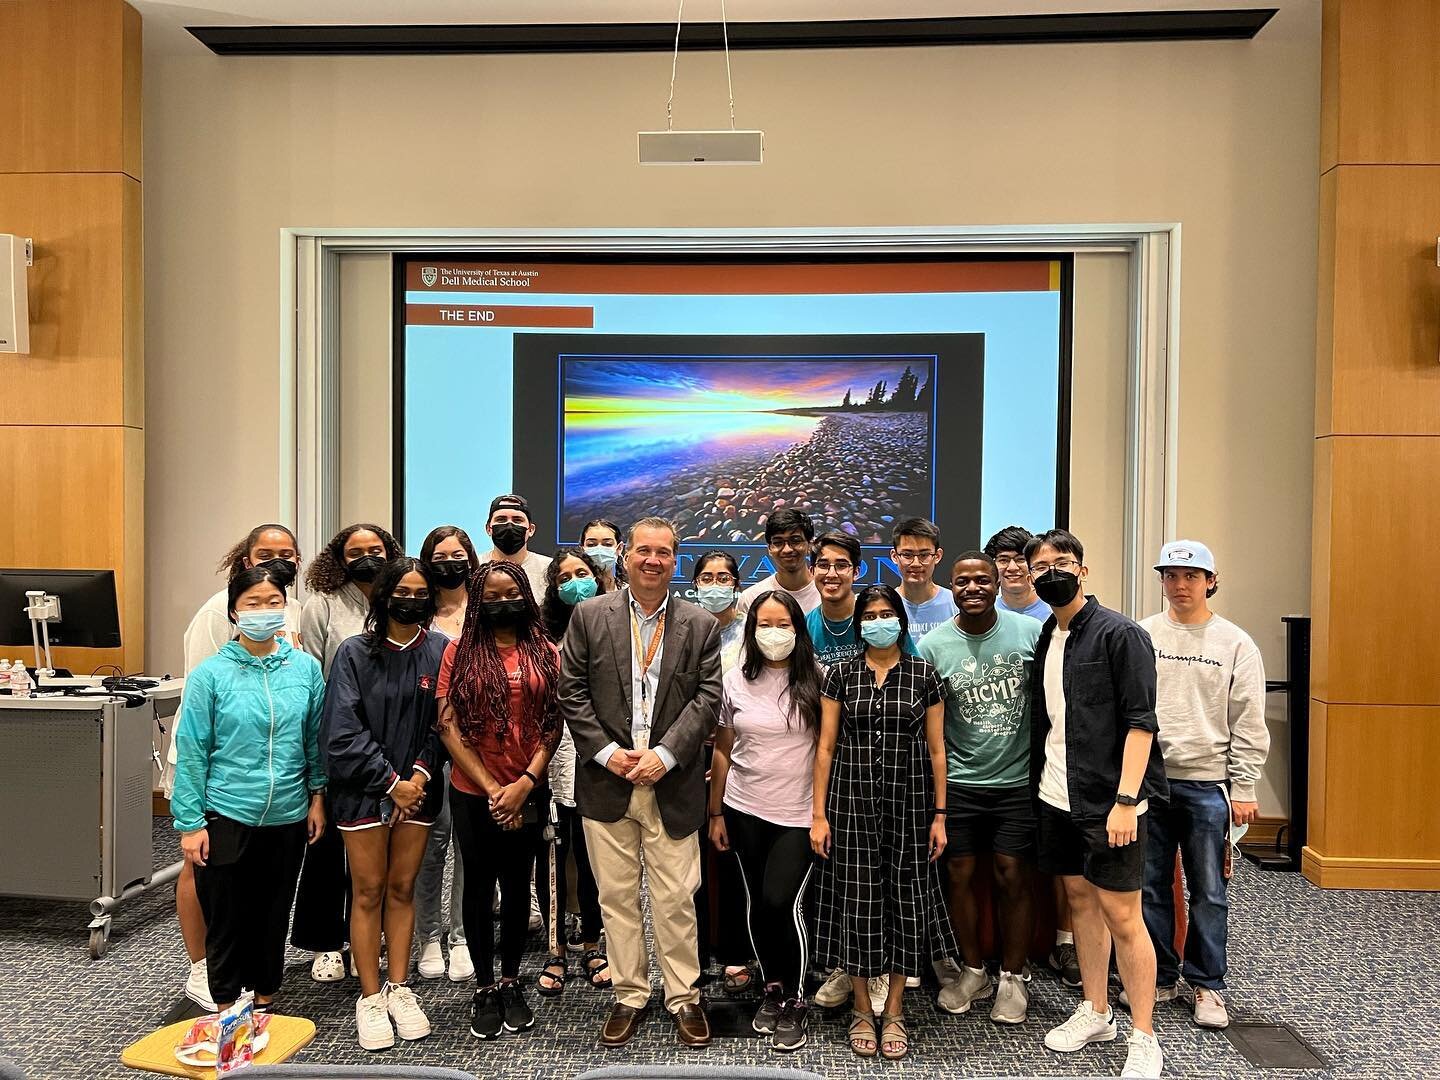 Thank you to Dr. Macones and those who came out to the DLS! We had a great time learning from Dr. Macones about his career and research! #lifelonglearning #dellmed #womenshealth